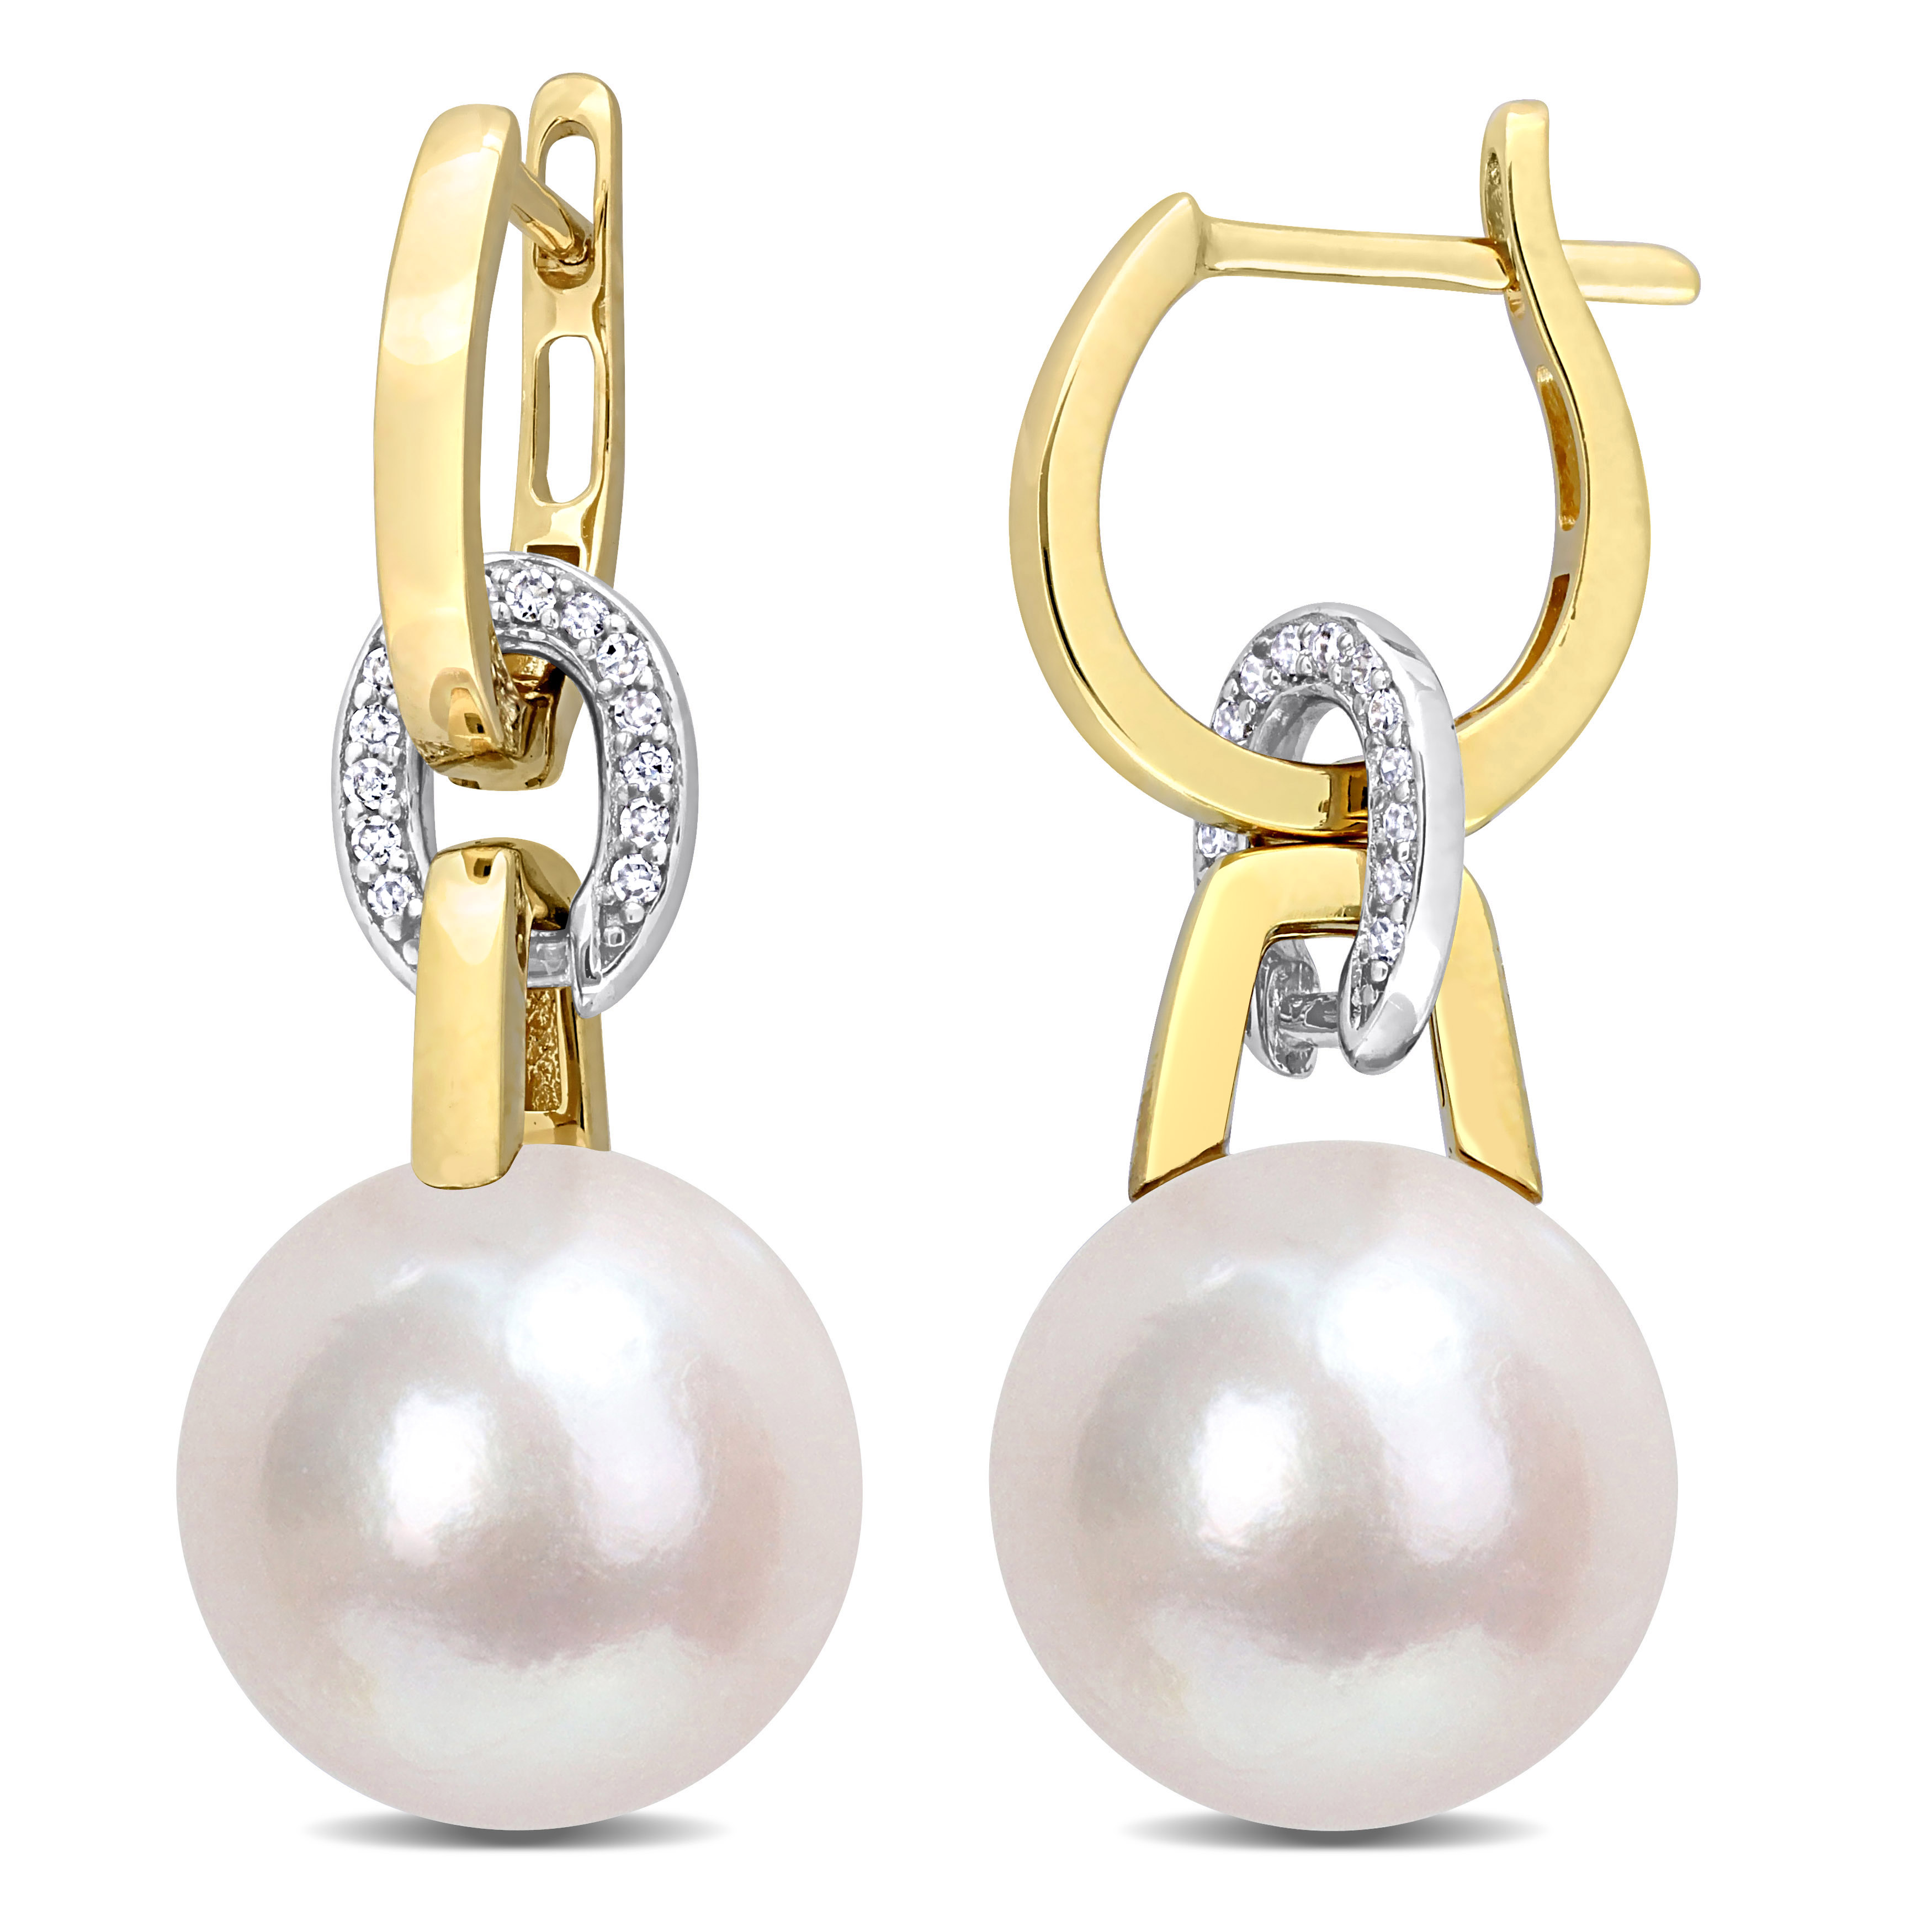 11 - 12 MM Freshwater Cultured Pearl & 1/10 CT TW Diamond Huggie Earrings in 2-Tone 14k Yellow and White Gold